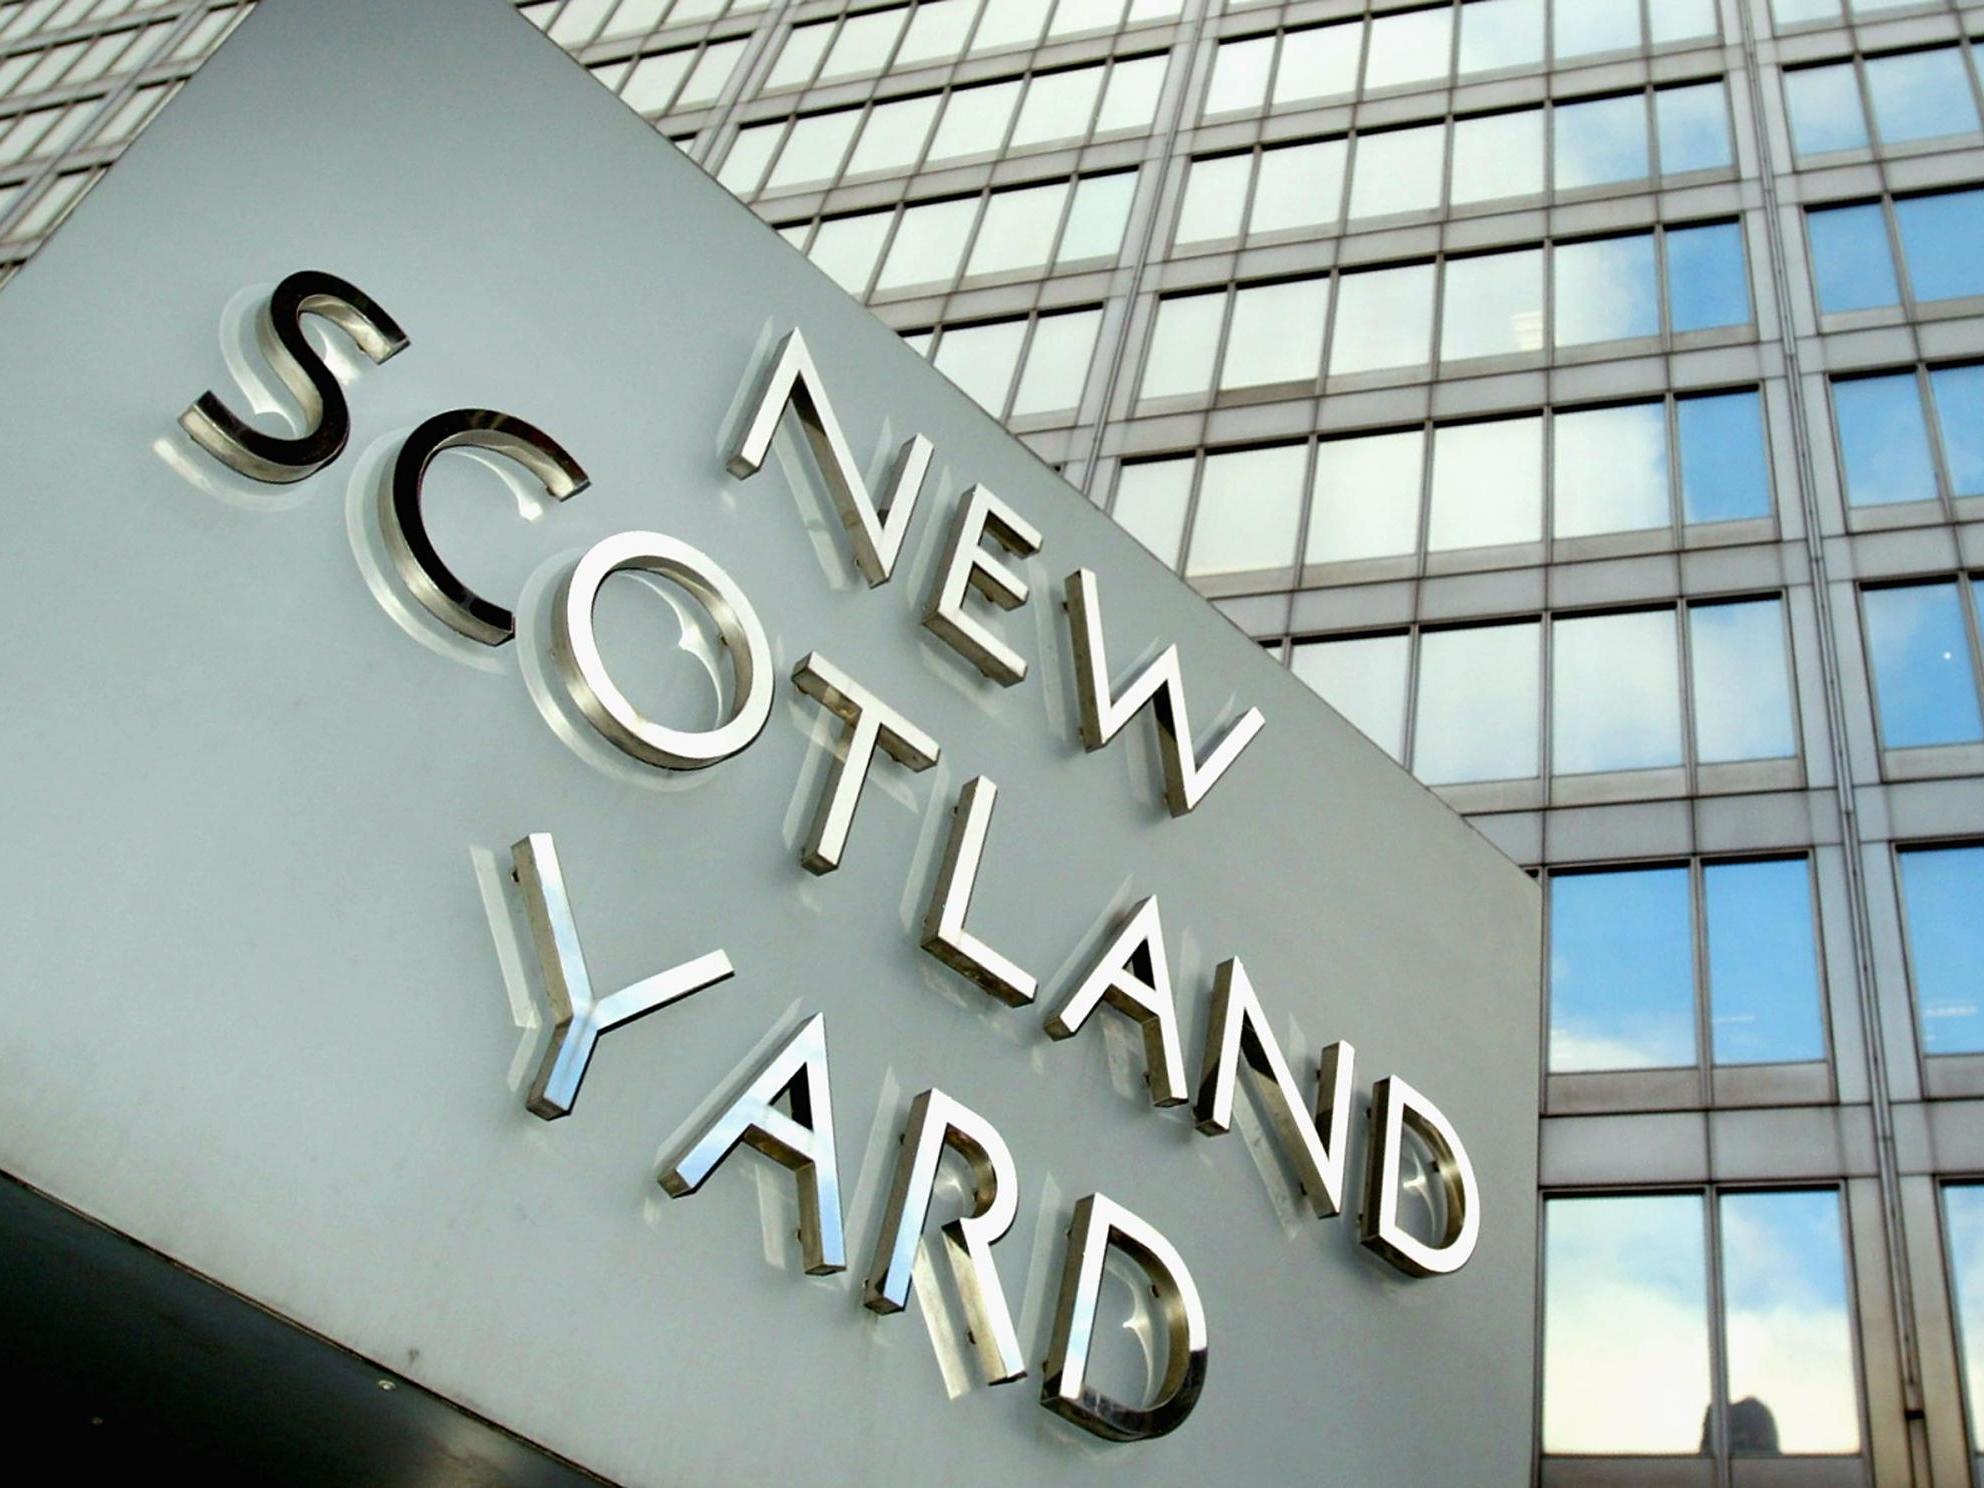 Scotland Yard said enquiries are ongoing to establish the victim’s identity and any possible motives